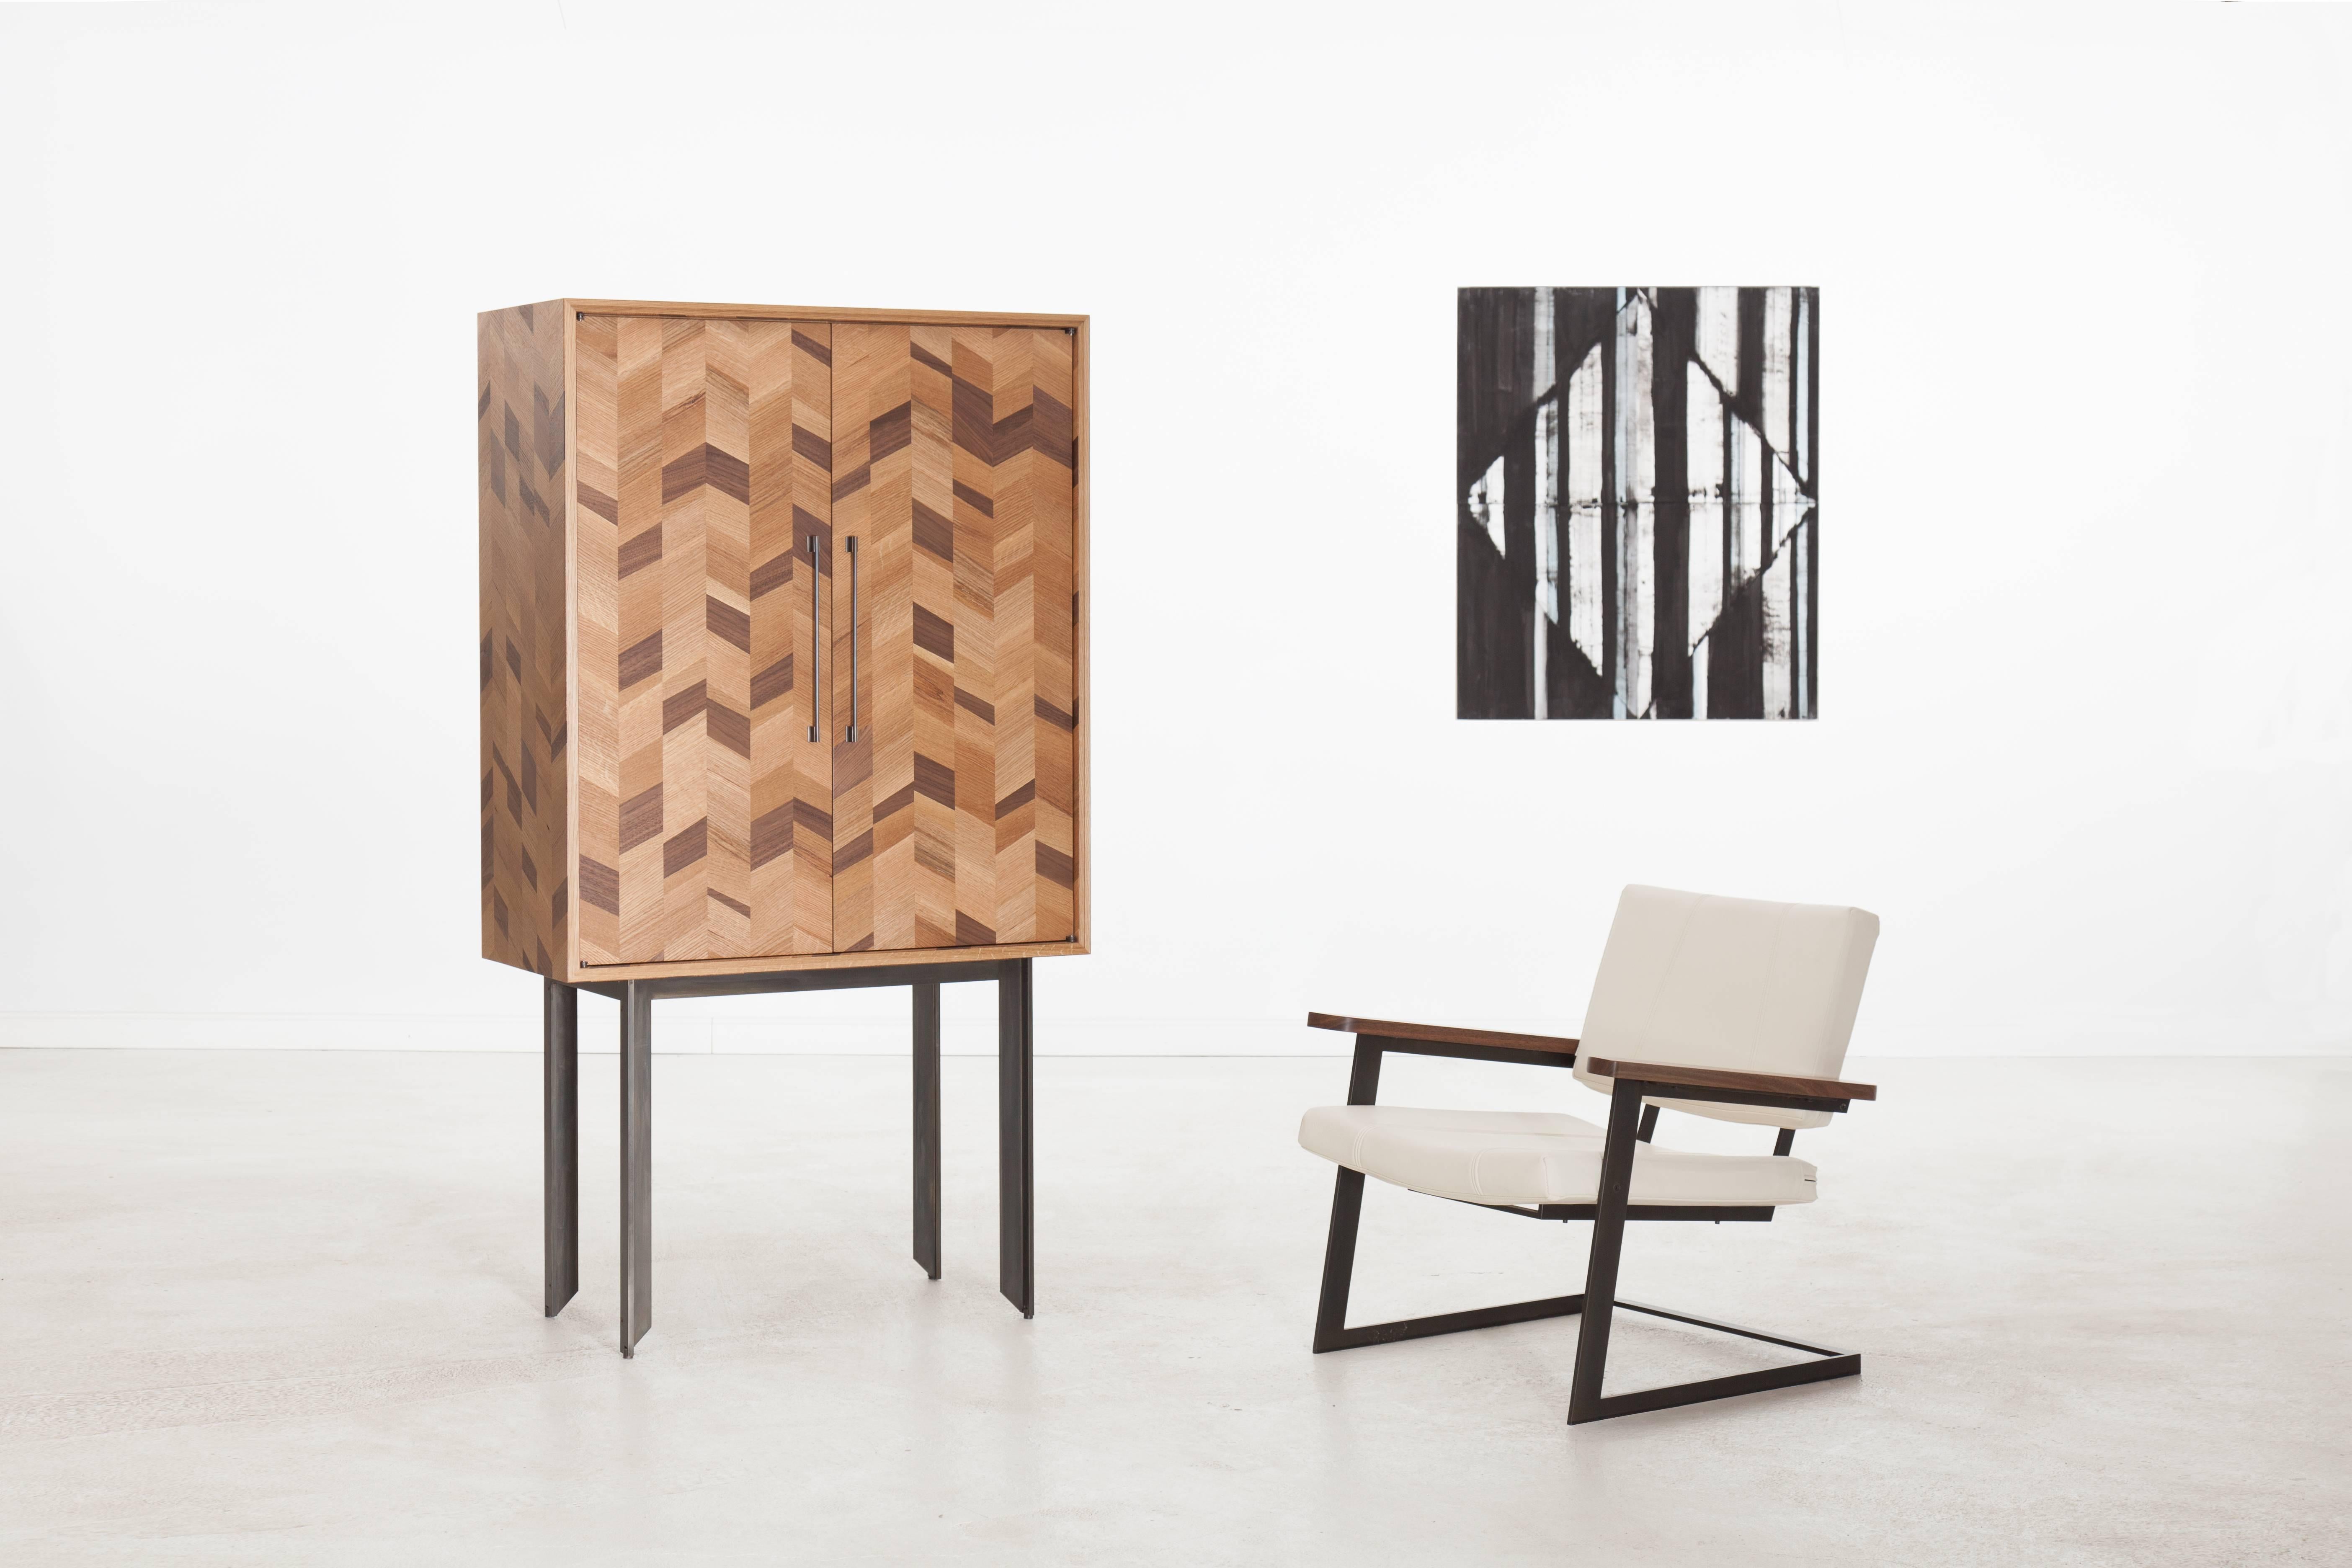 Pairing patterned woodwork with brass accents, the Dorothy Dry Bar is sharply complex and perfectly iconic. Made for the modern cocktail hour. Available in a variety of American hardwoods with studio-machined hardware. The Dorothy Dry Bar is made to